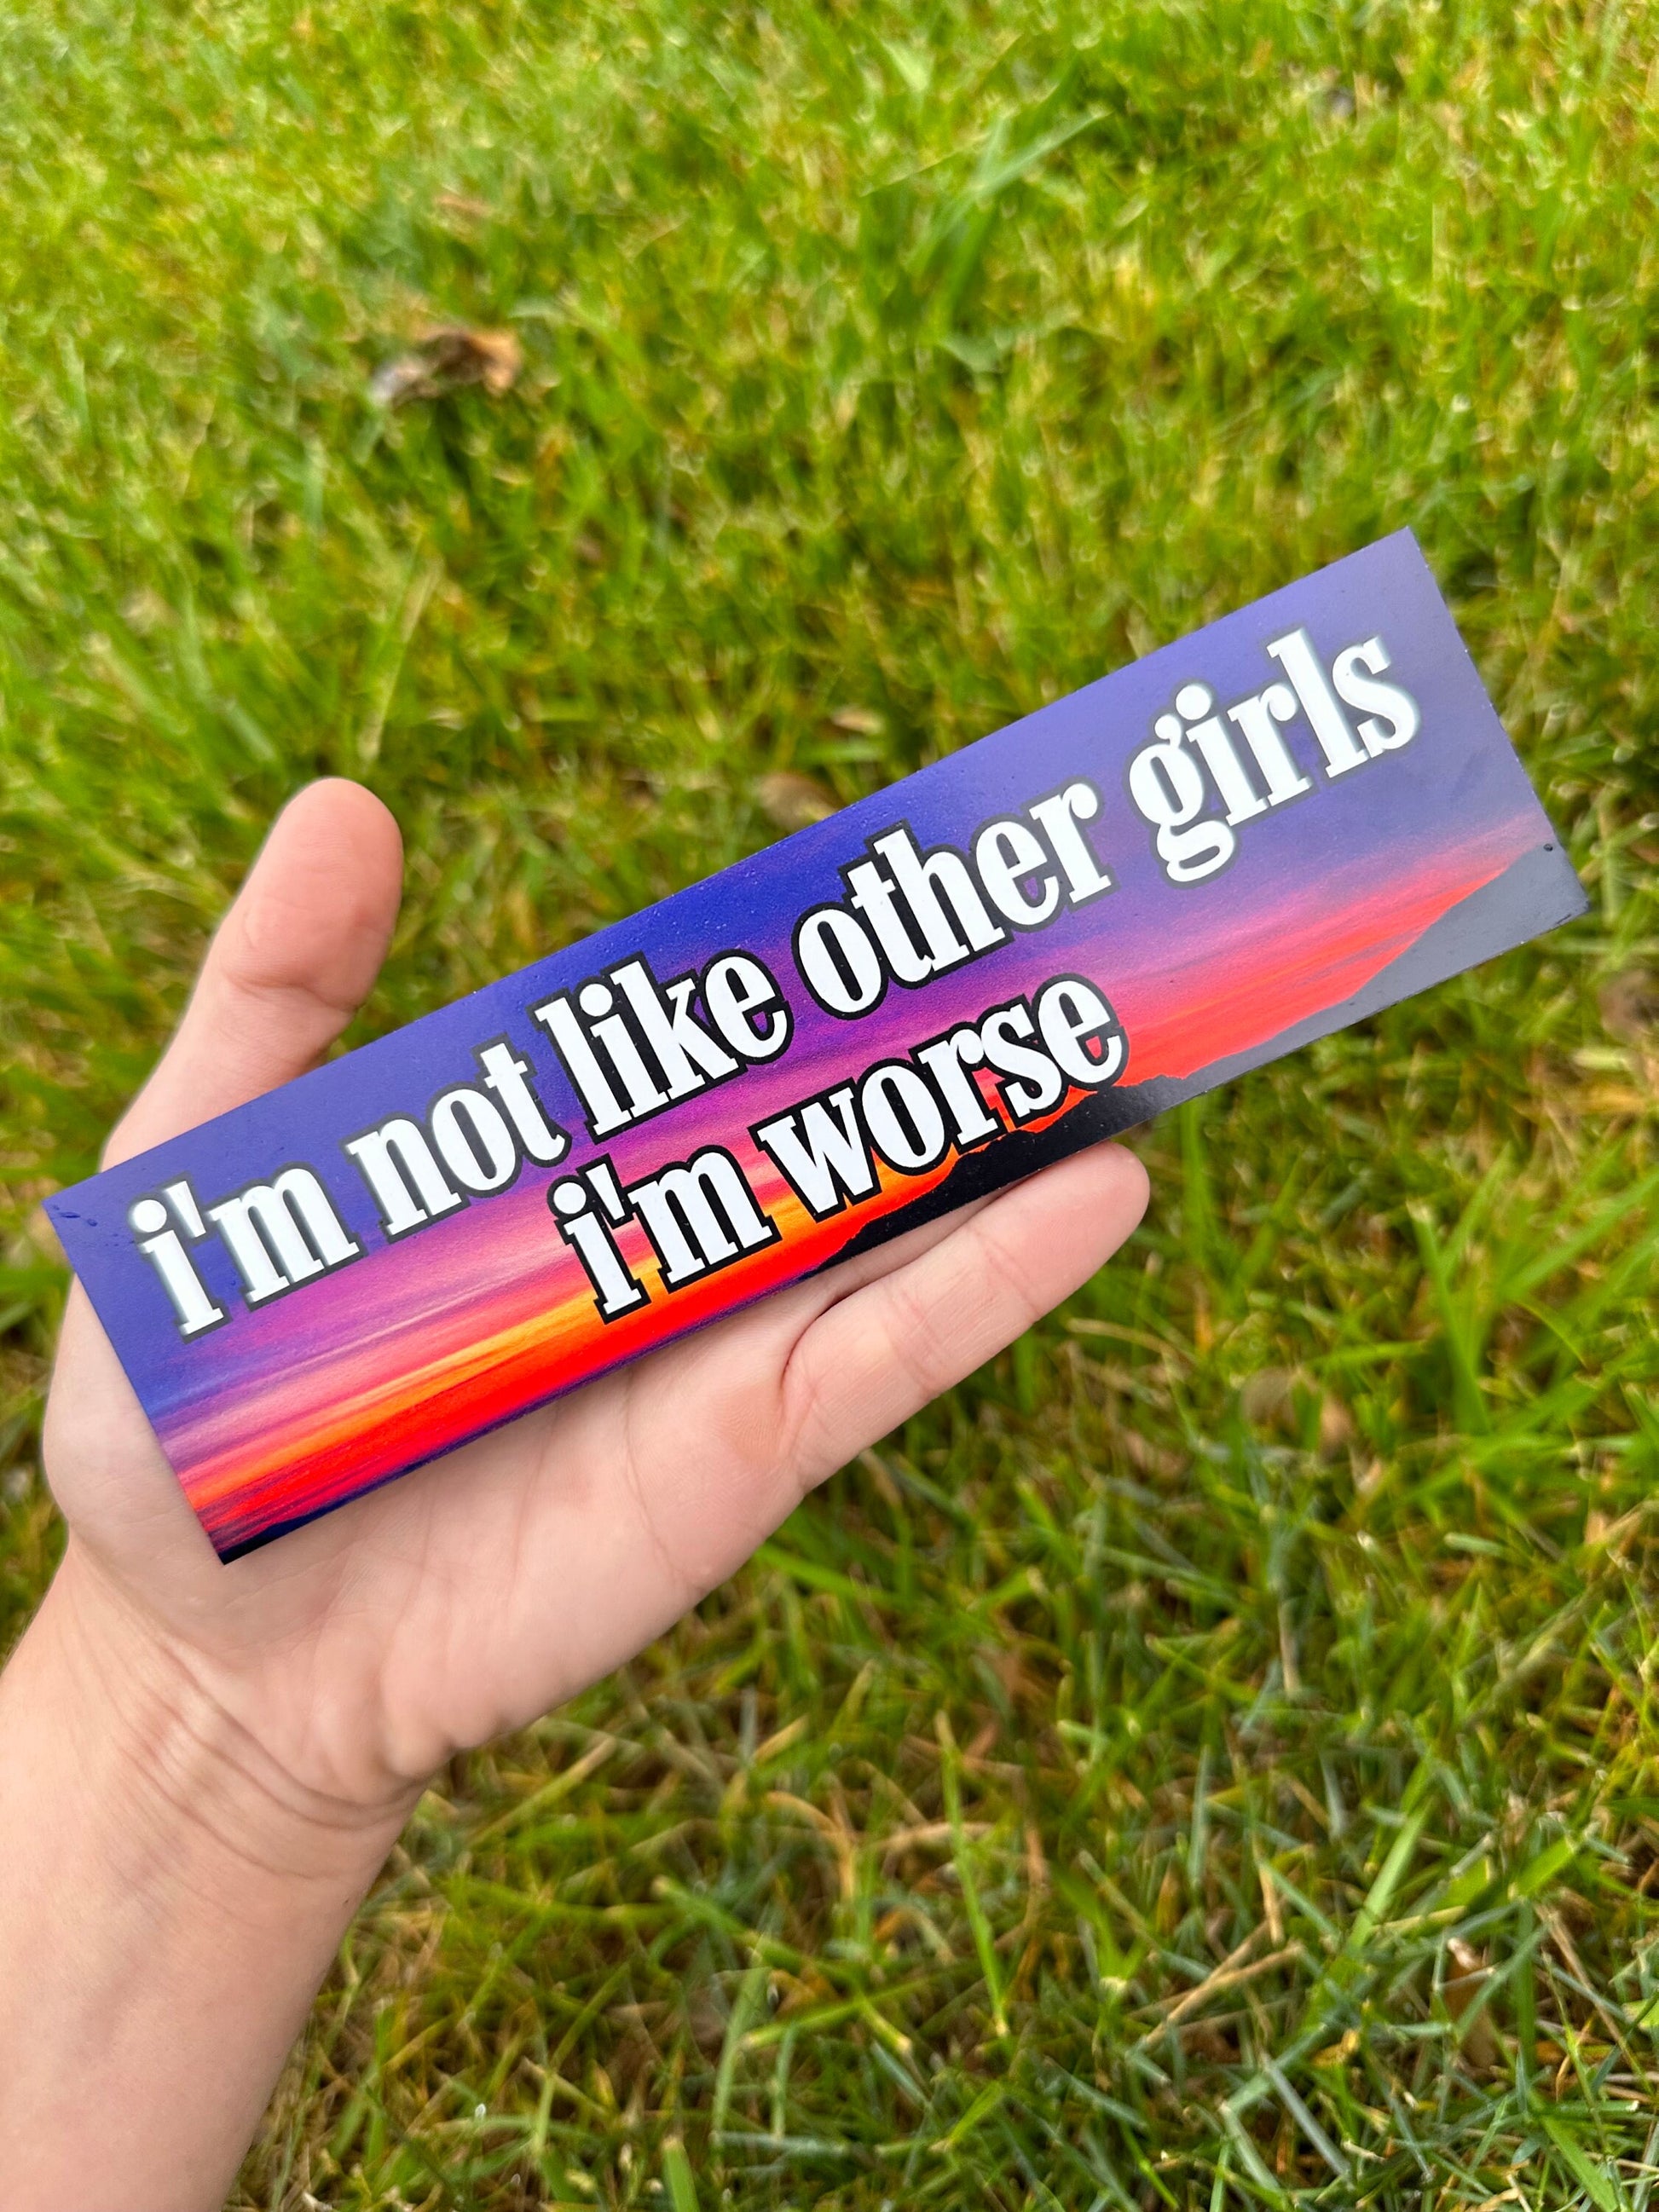 I’m Not Like Other Girls I’m Worse Car Magnet